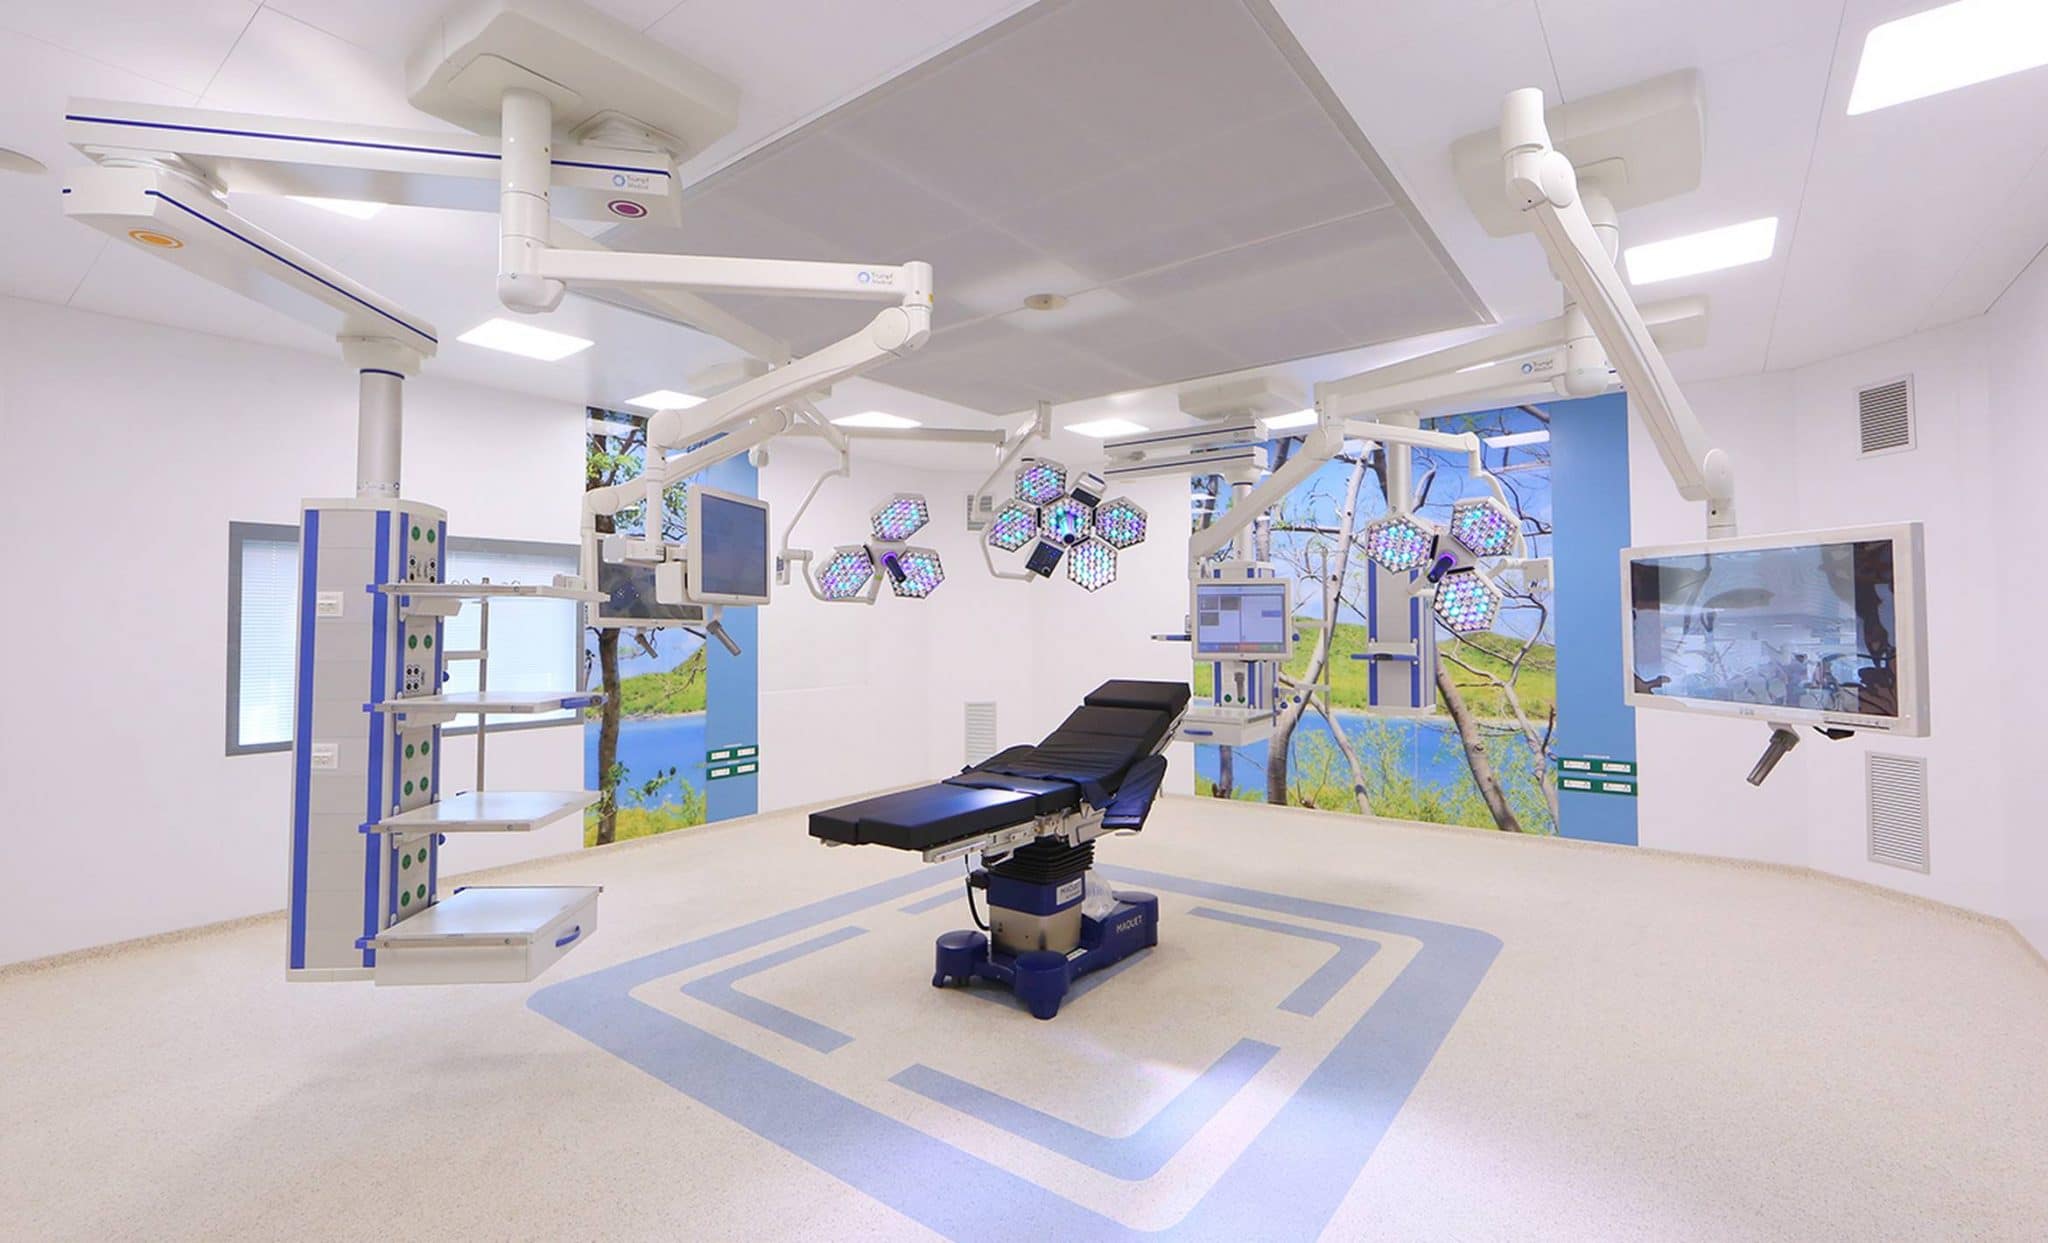 Featured image for “New Operating Rooms in India”